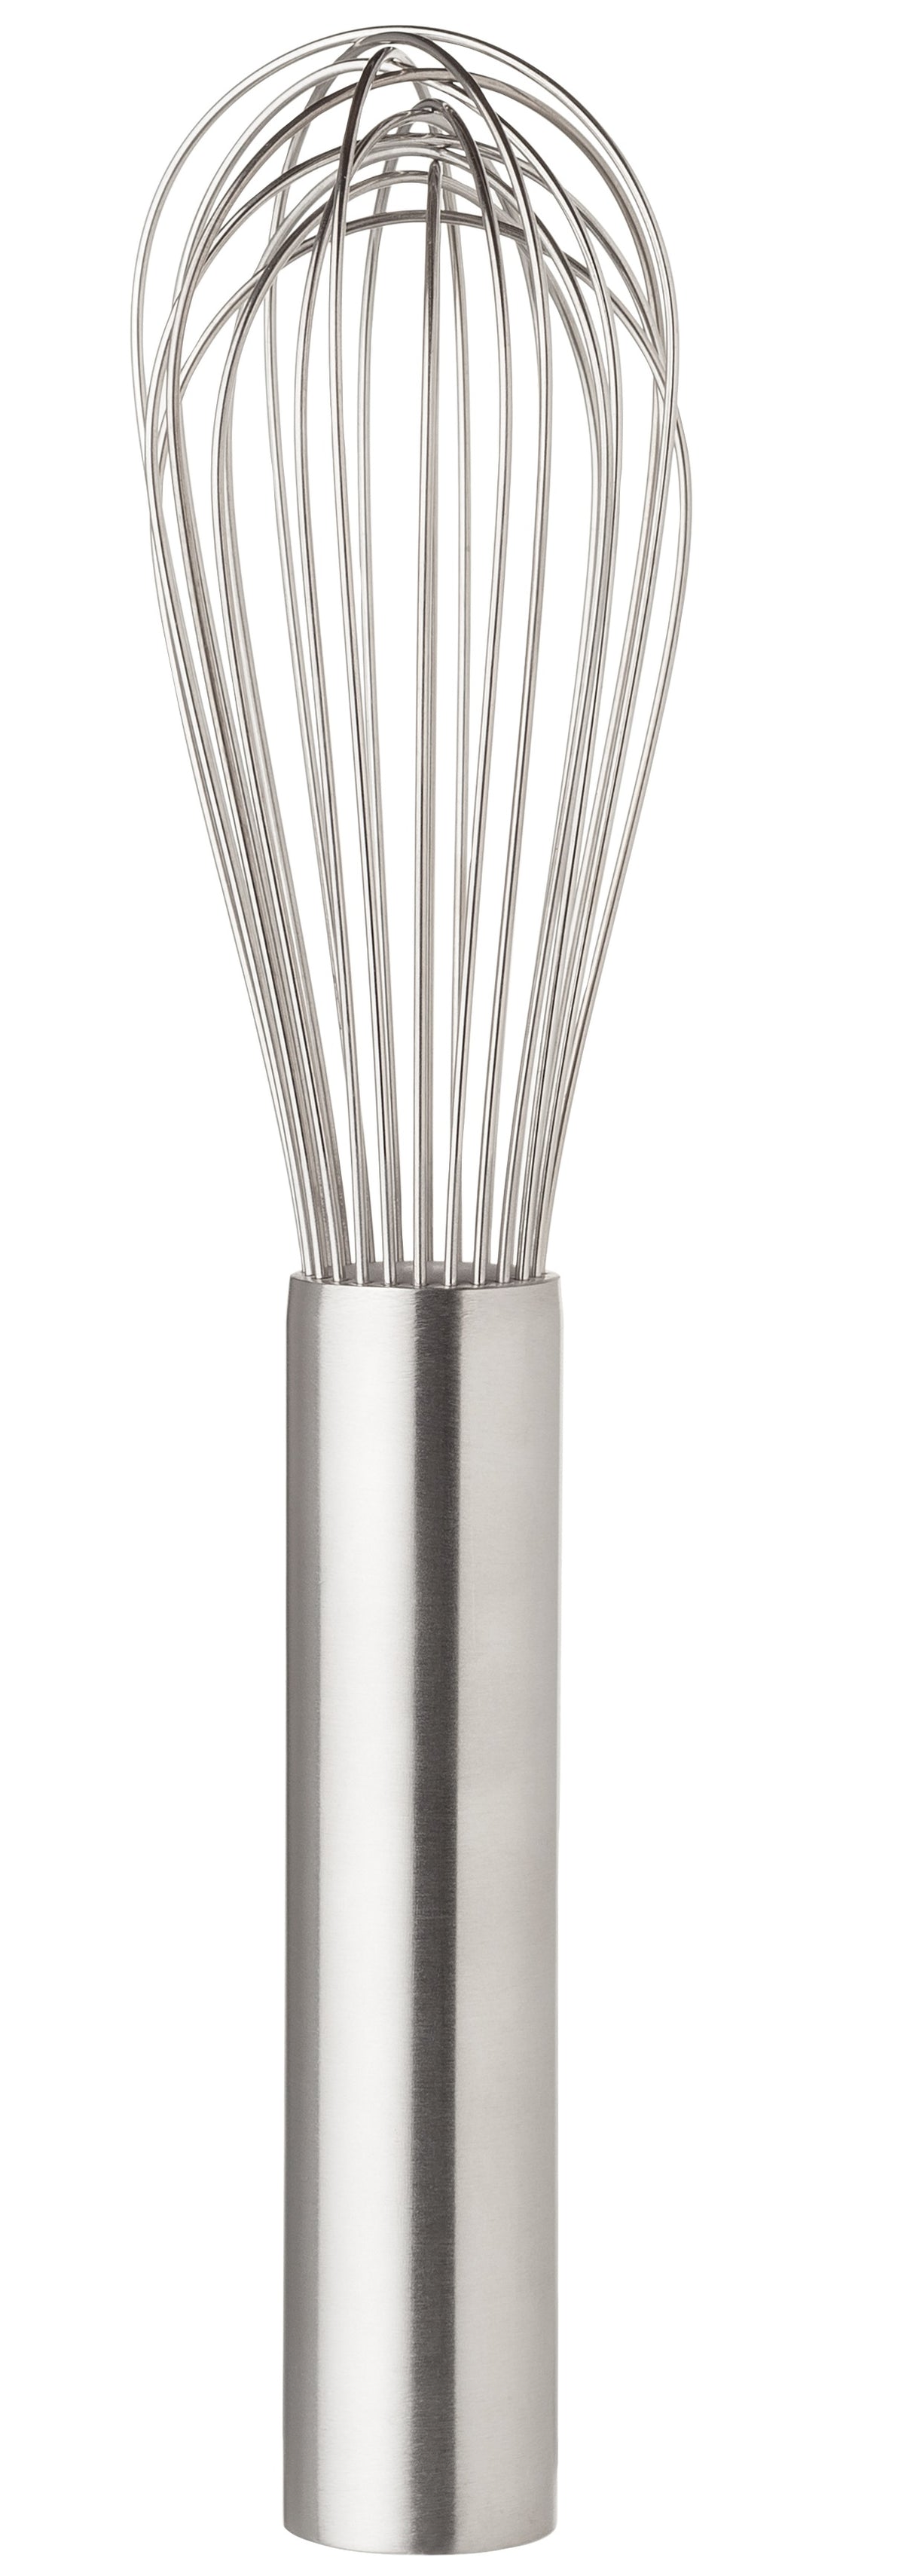 Mrs. Anderson's 80002 Baking Piano Whisk, 10"